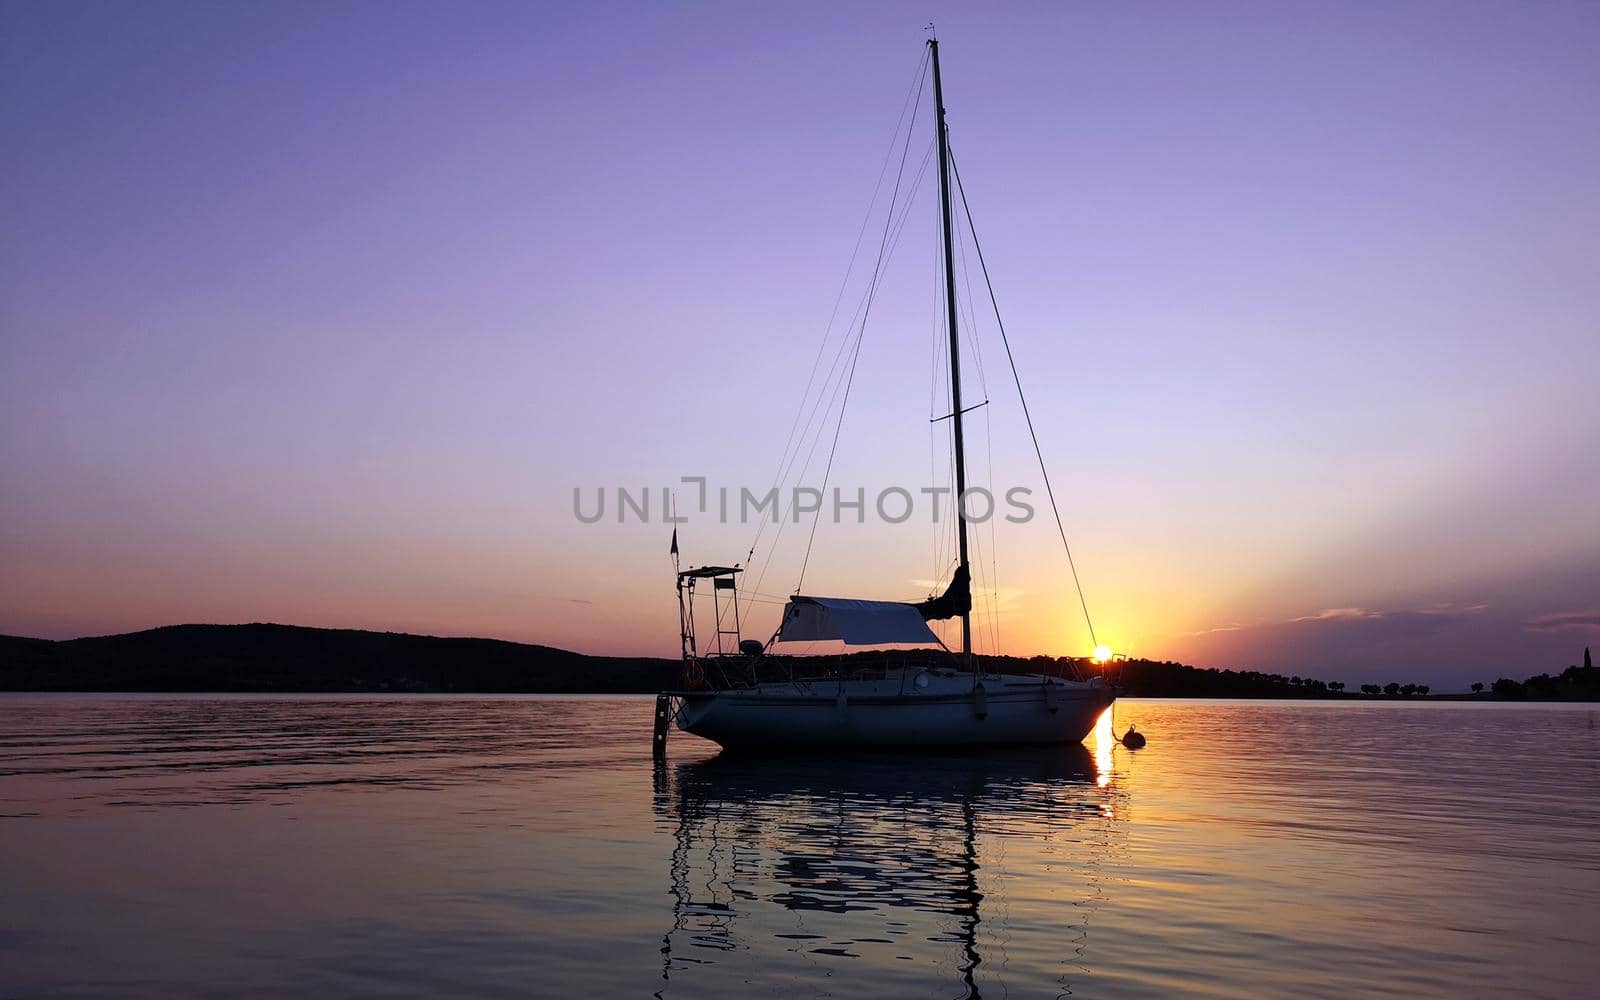 A sailboat anchored in a bay on a beautiful sunset in Greece